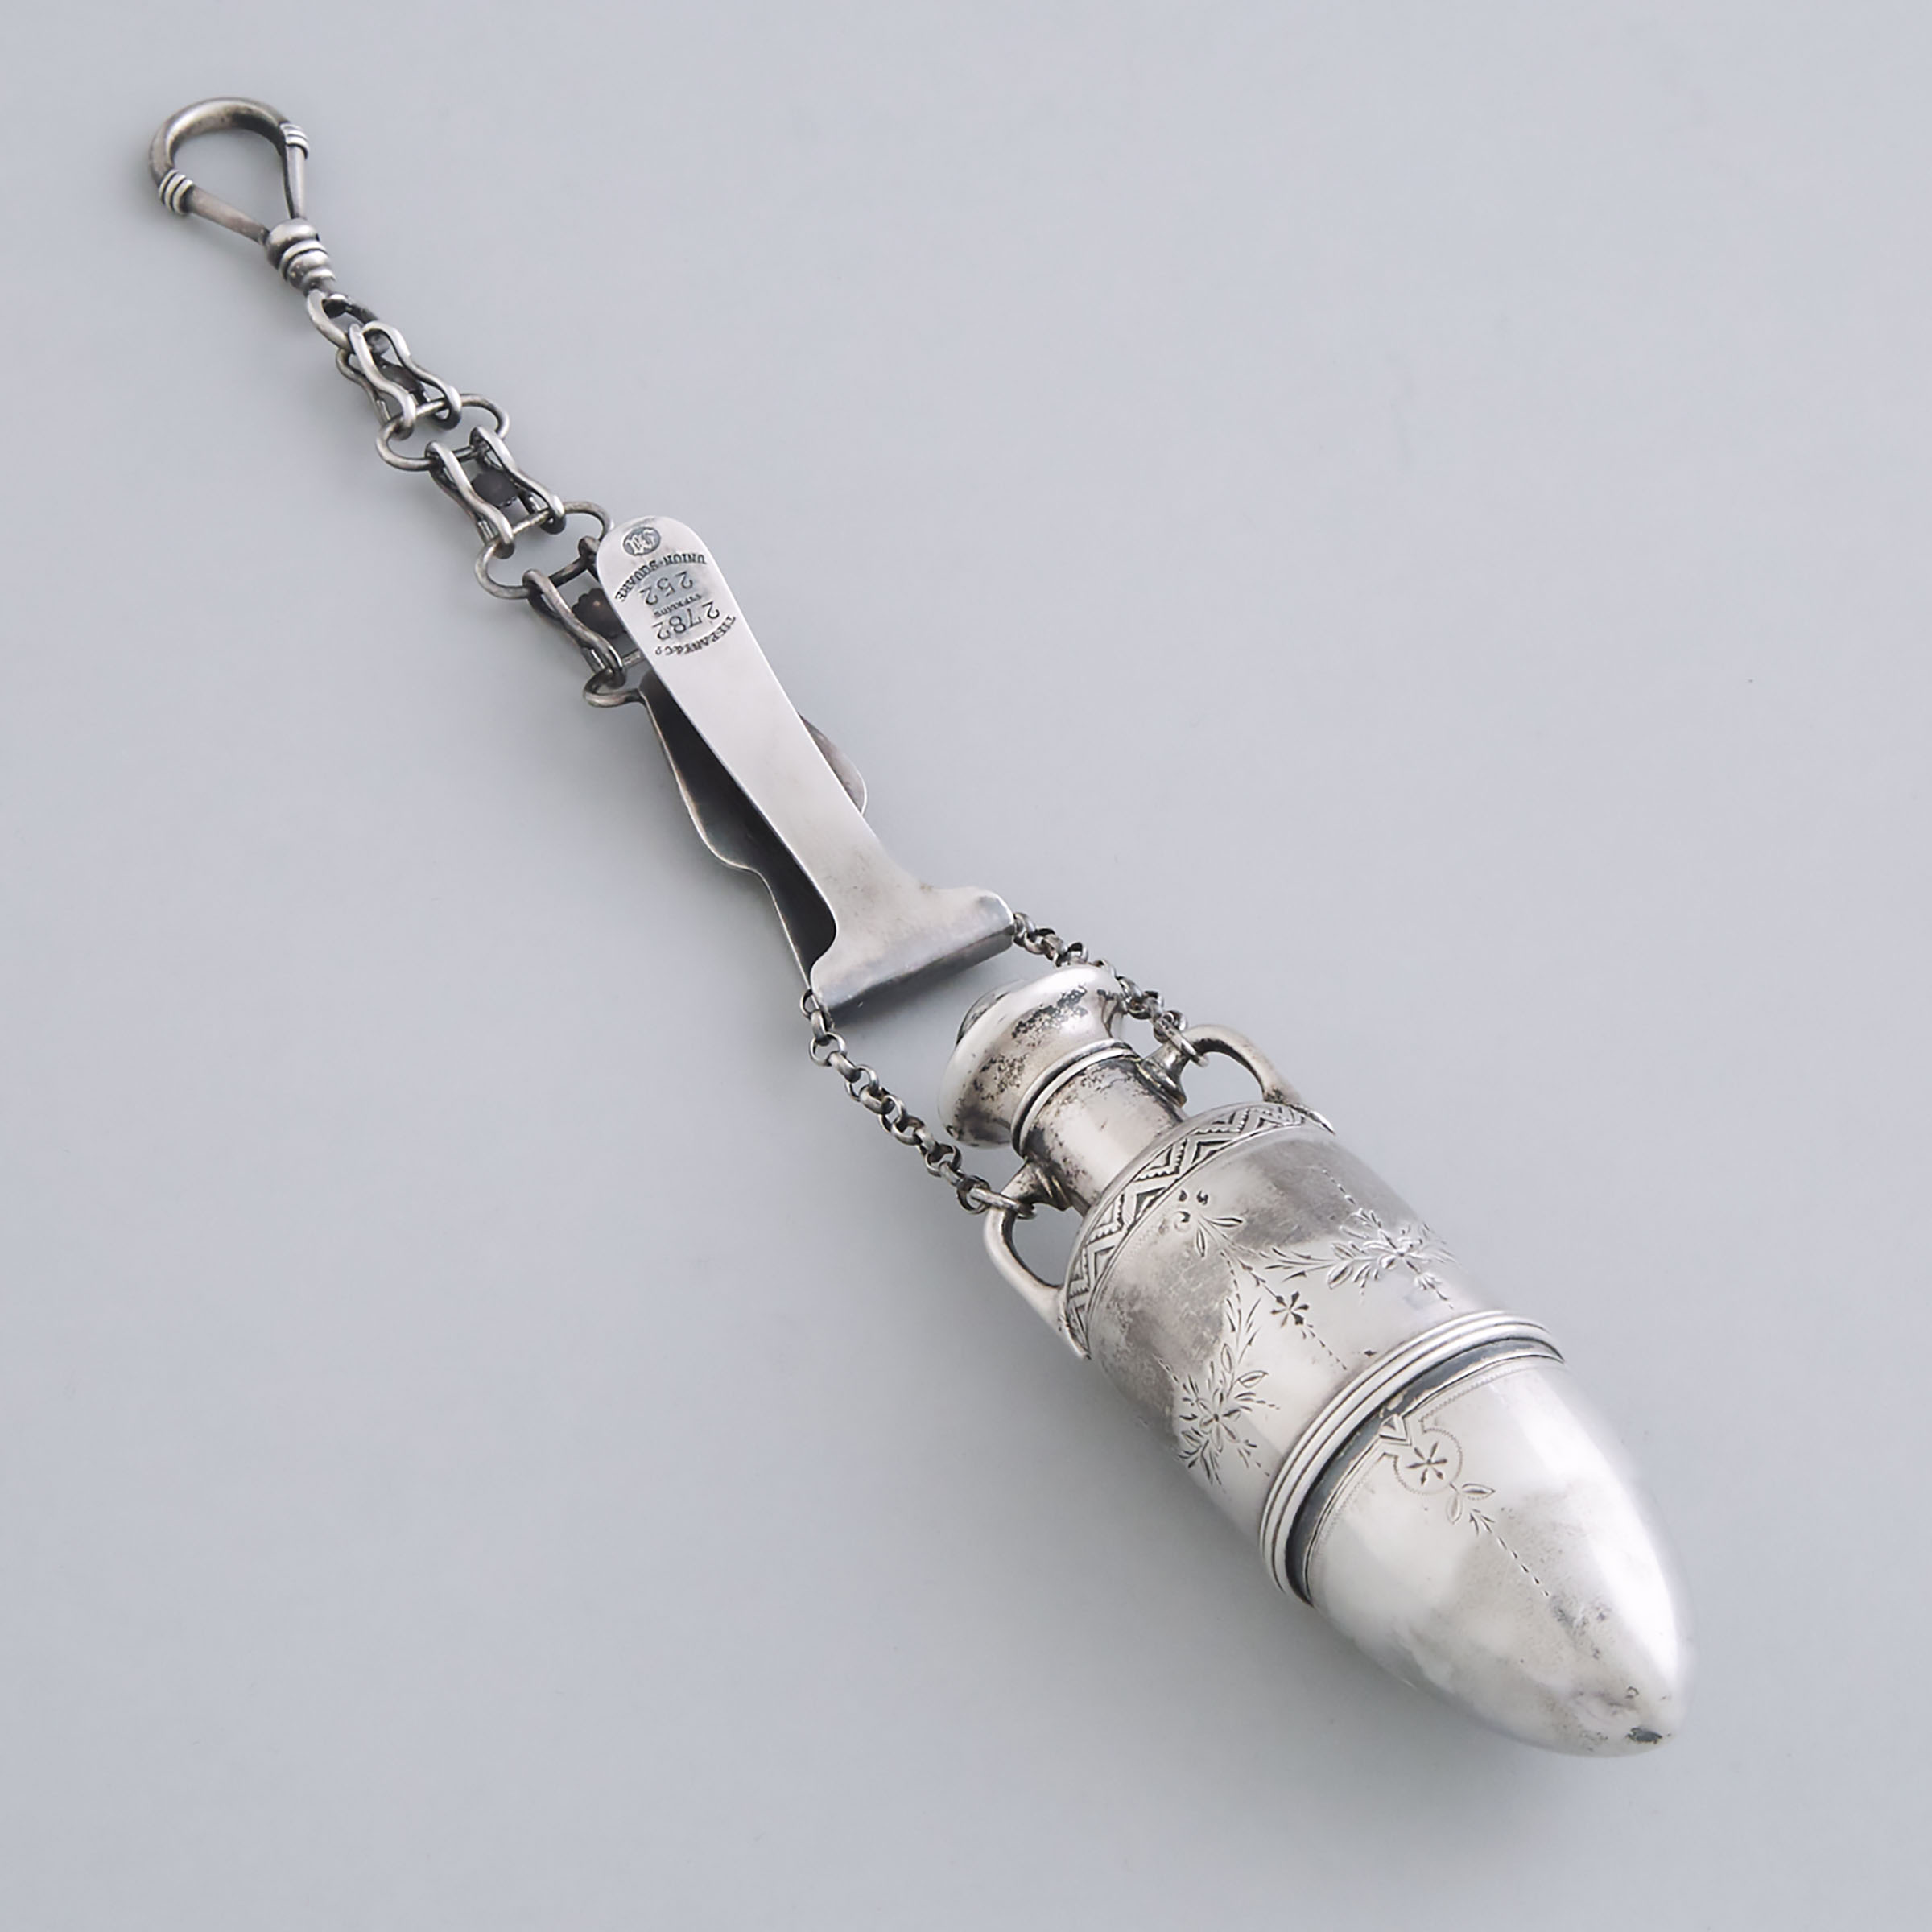 American Silver Two-Compartment Amphora Perfume Bottle with Belt Hook, Tiffany & Co., New York, N.Y., c.1870-75